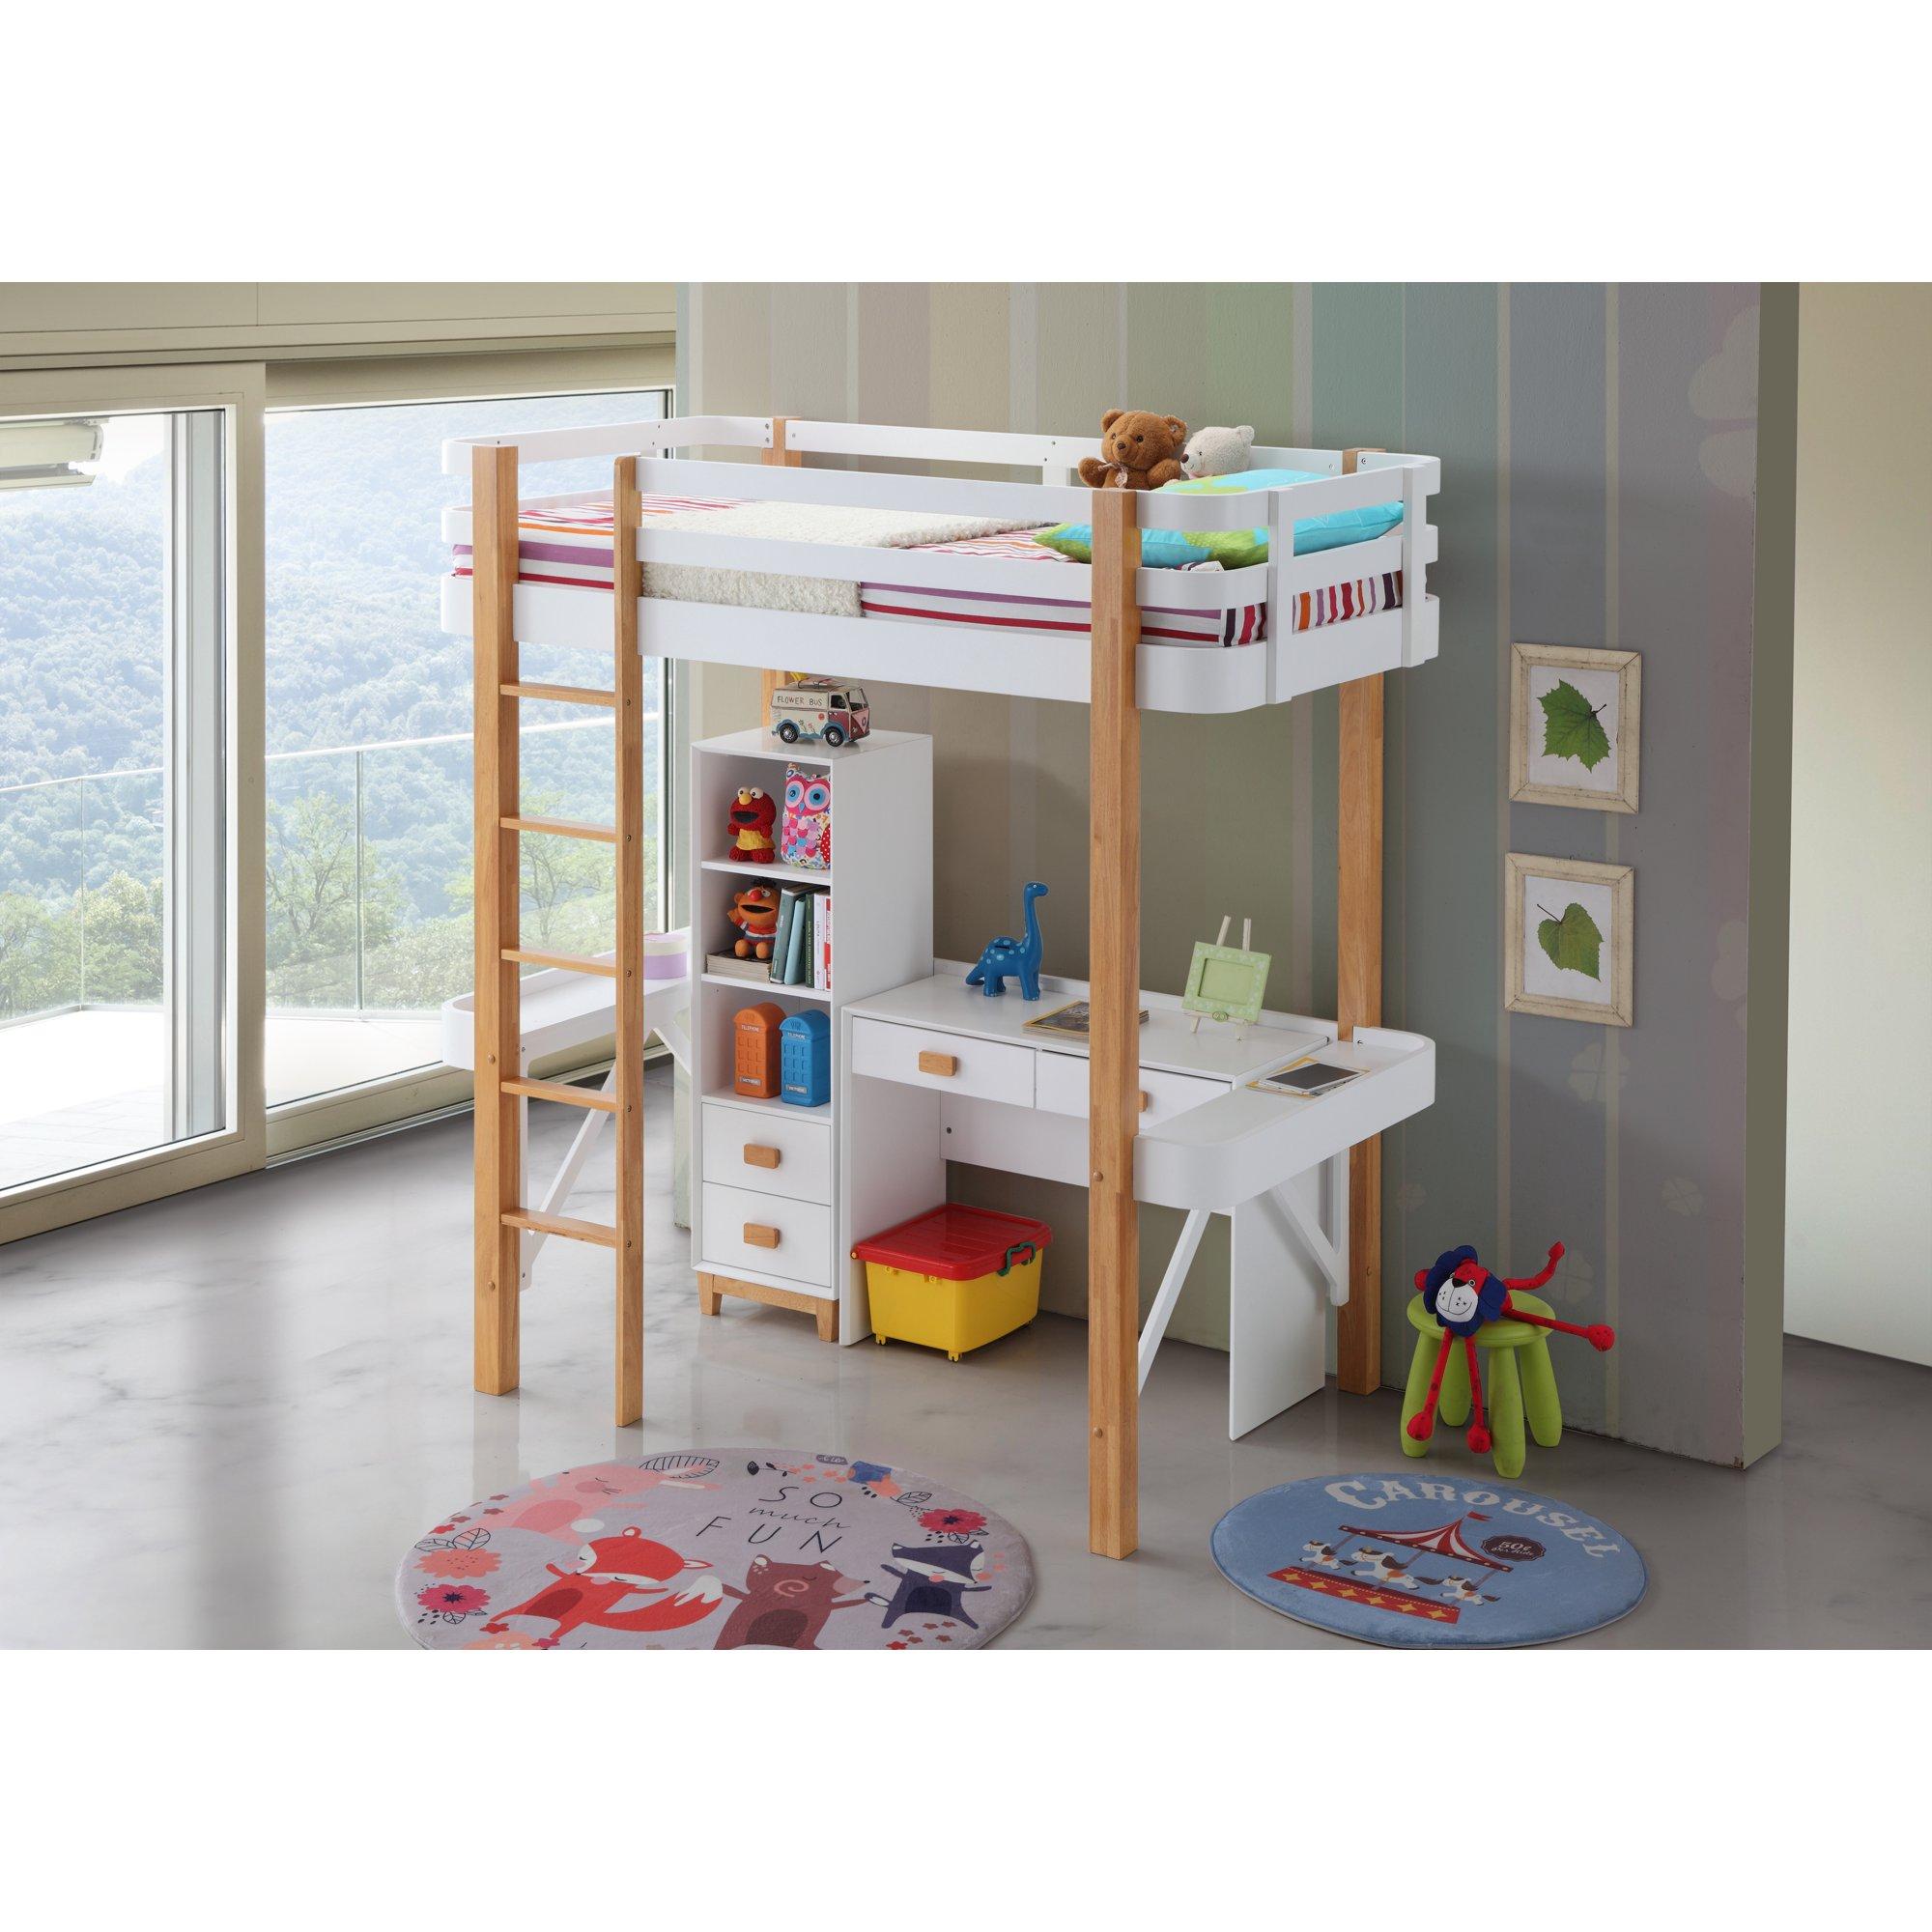 Transitional, Rustic Loft Bed Rutherford 37970 in Natural, White 